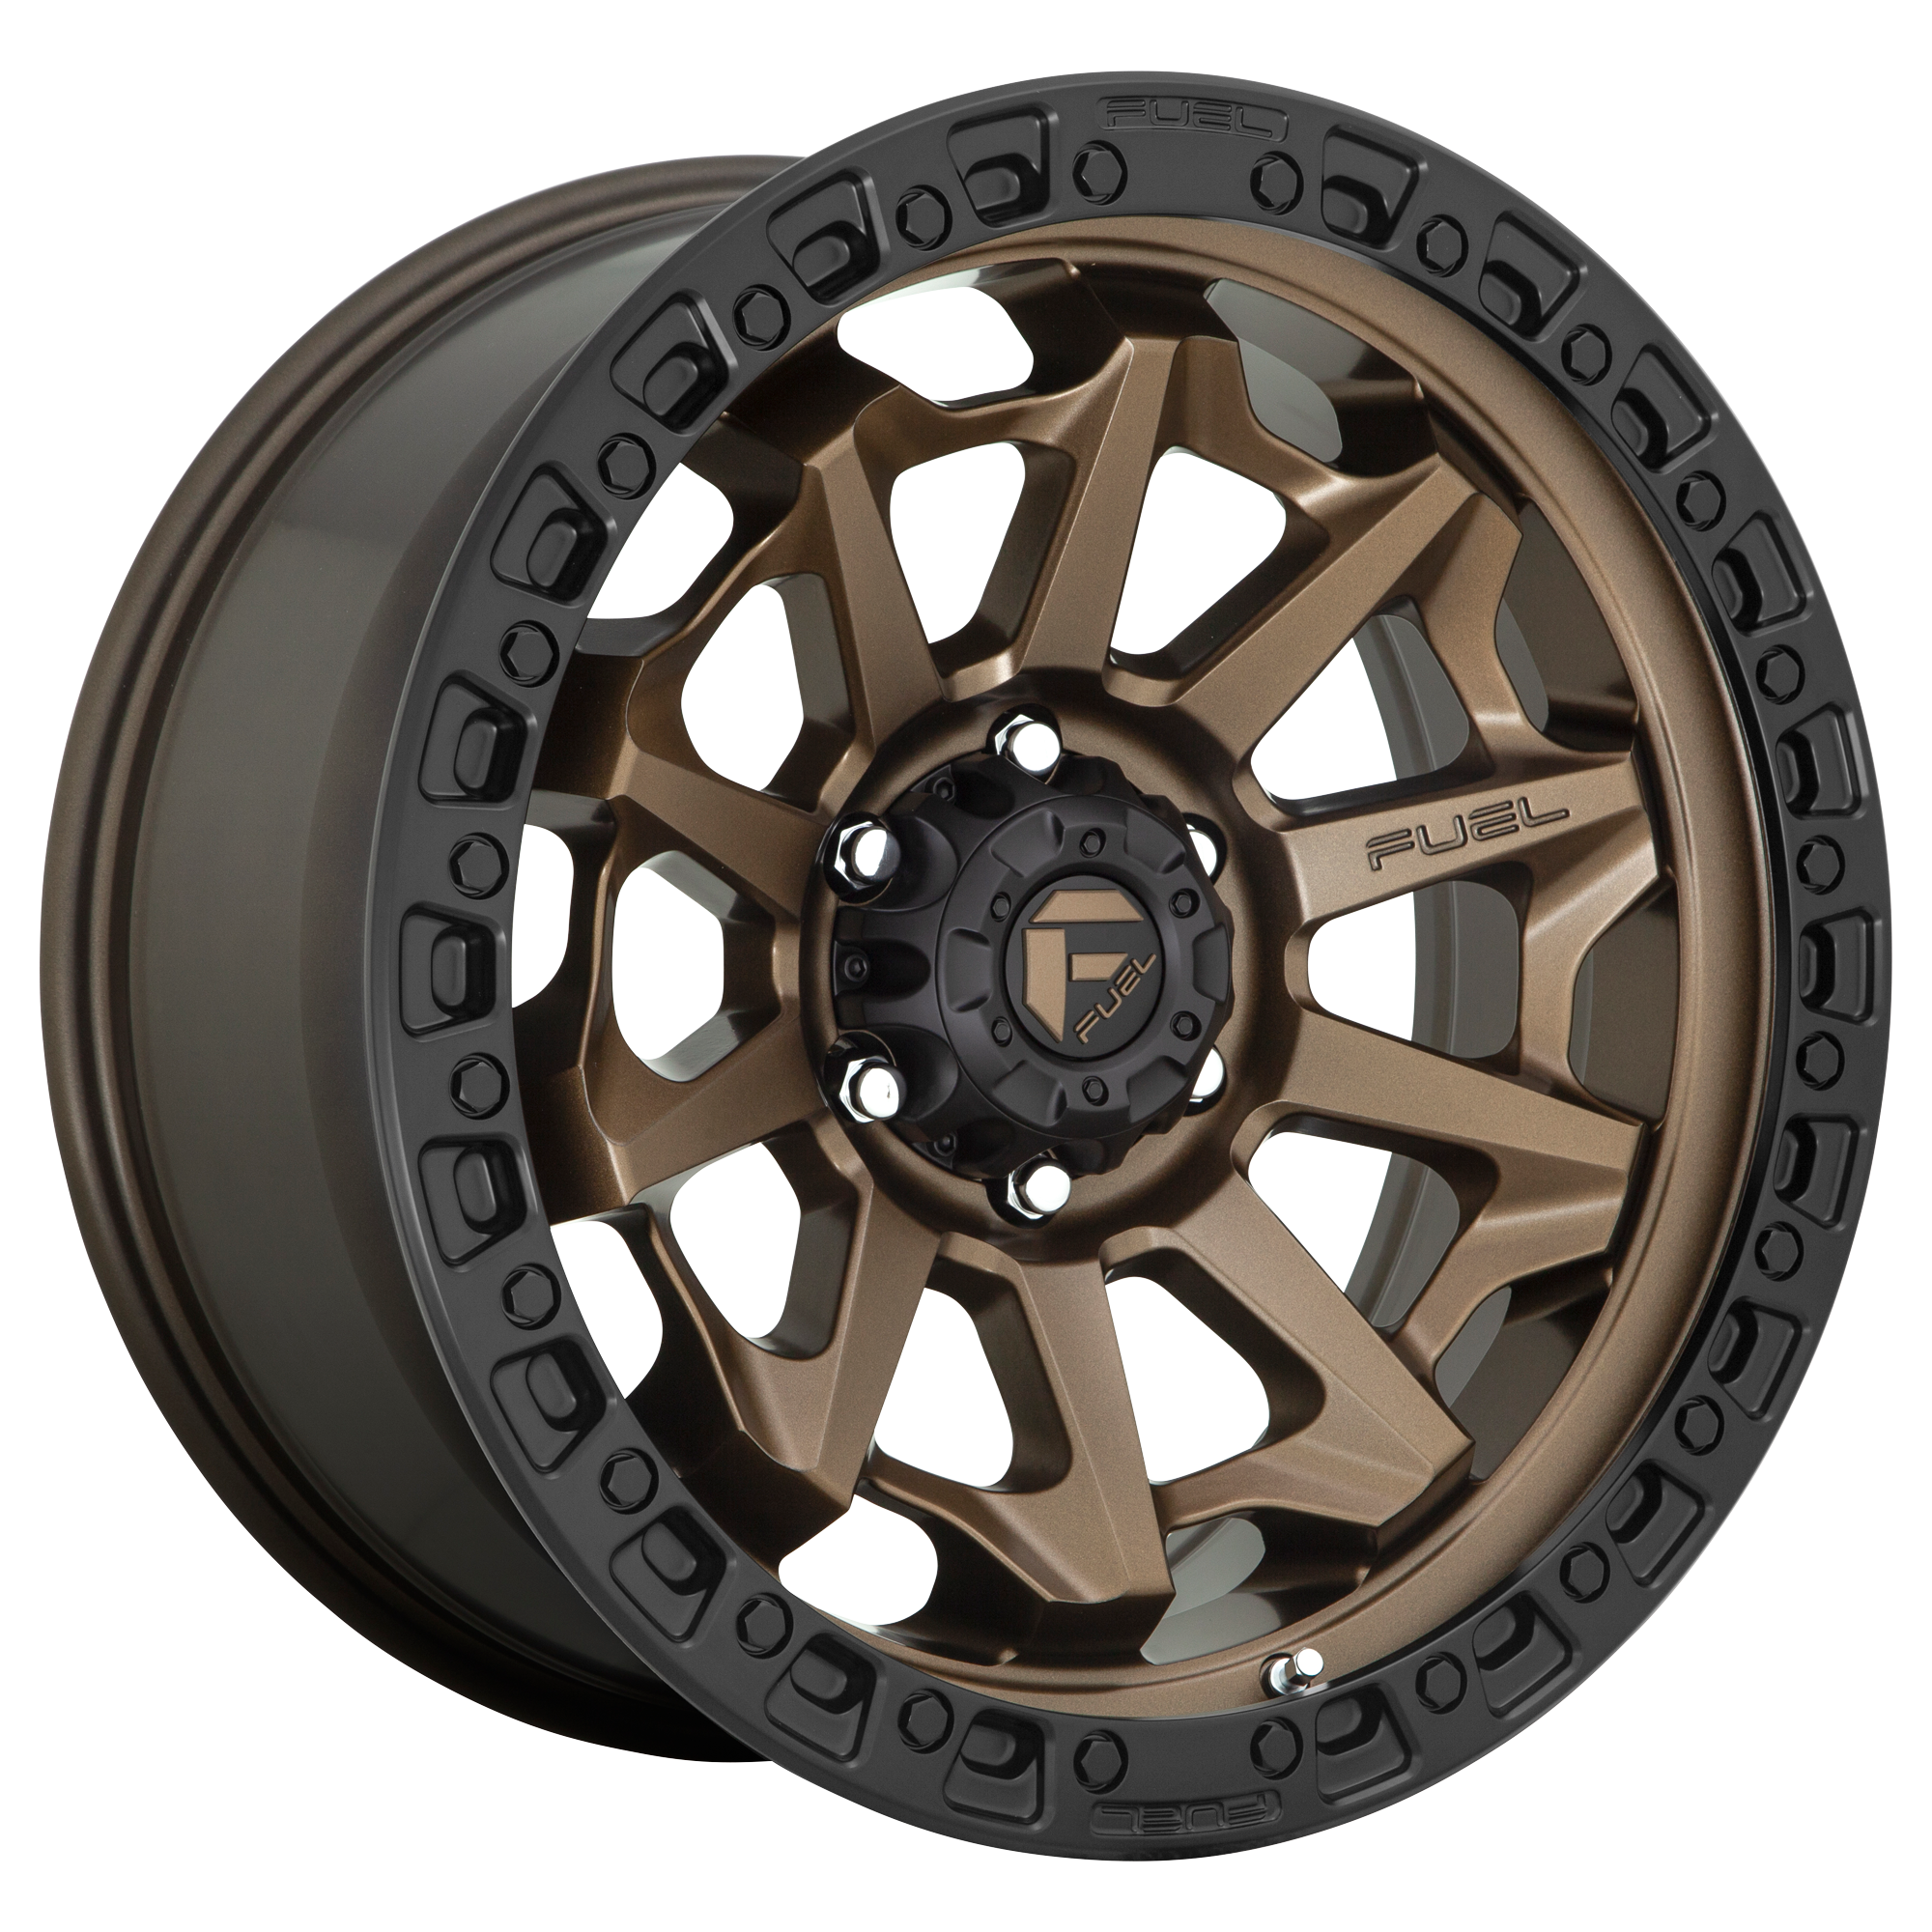 COVERT 17x9 8x170.00 MATTE BRONZE BLACK BEAD RING (1 mm) - Tires and Engine Performance